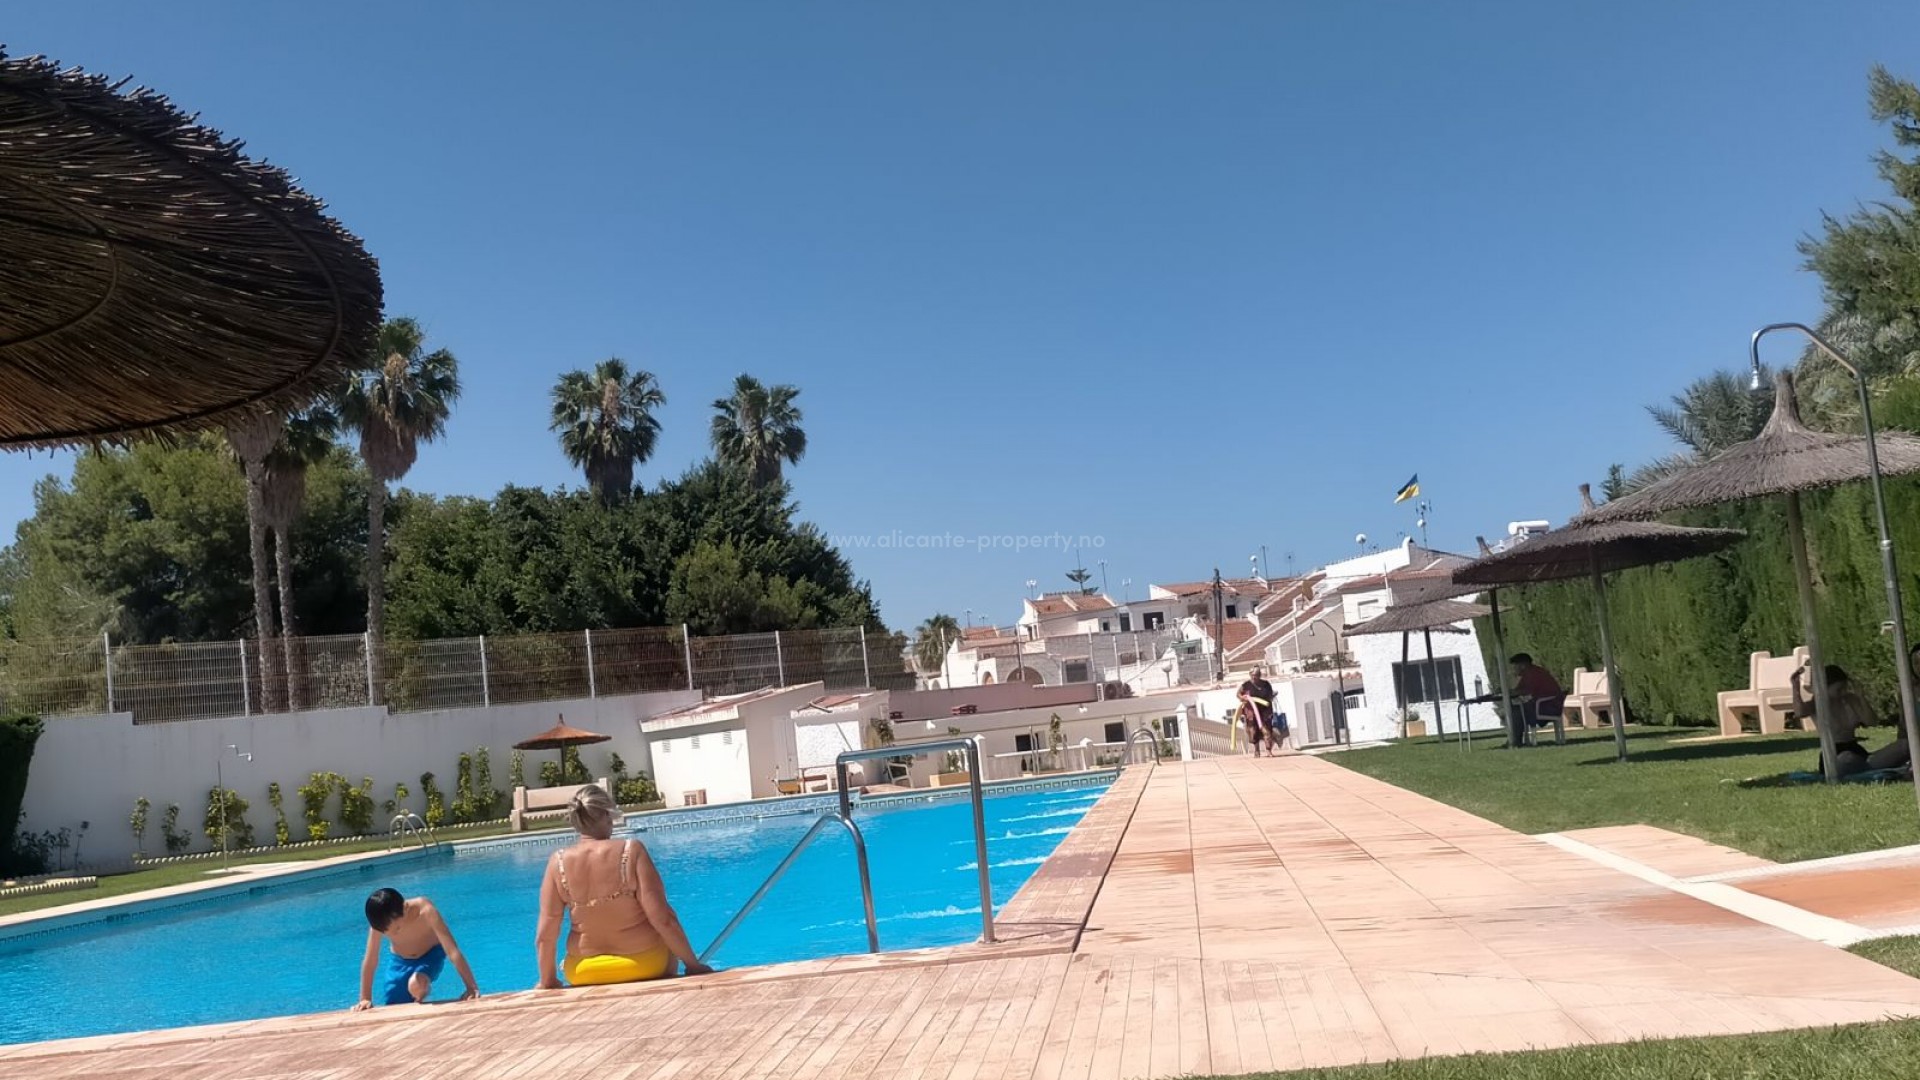 Investment property in Spain, equity release bungalow/semi-detached house in Torrevieja, Alicante, 3 bedrooms, 2 bathrooms, shared pool, 2 solariums and open terrace